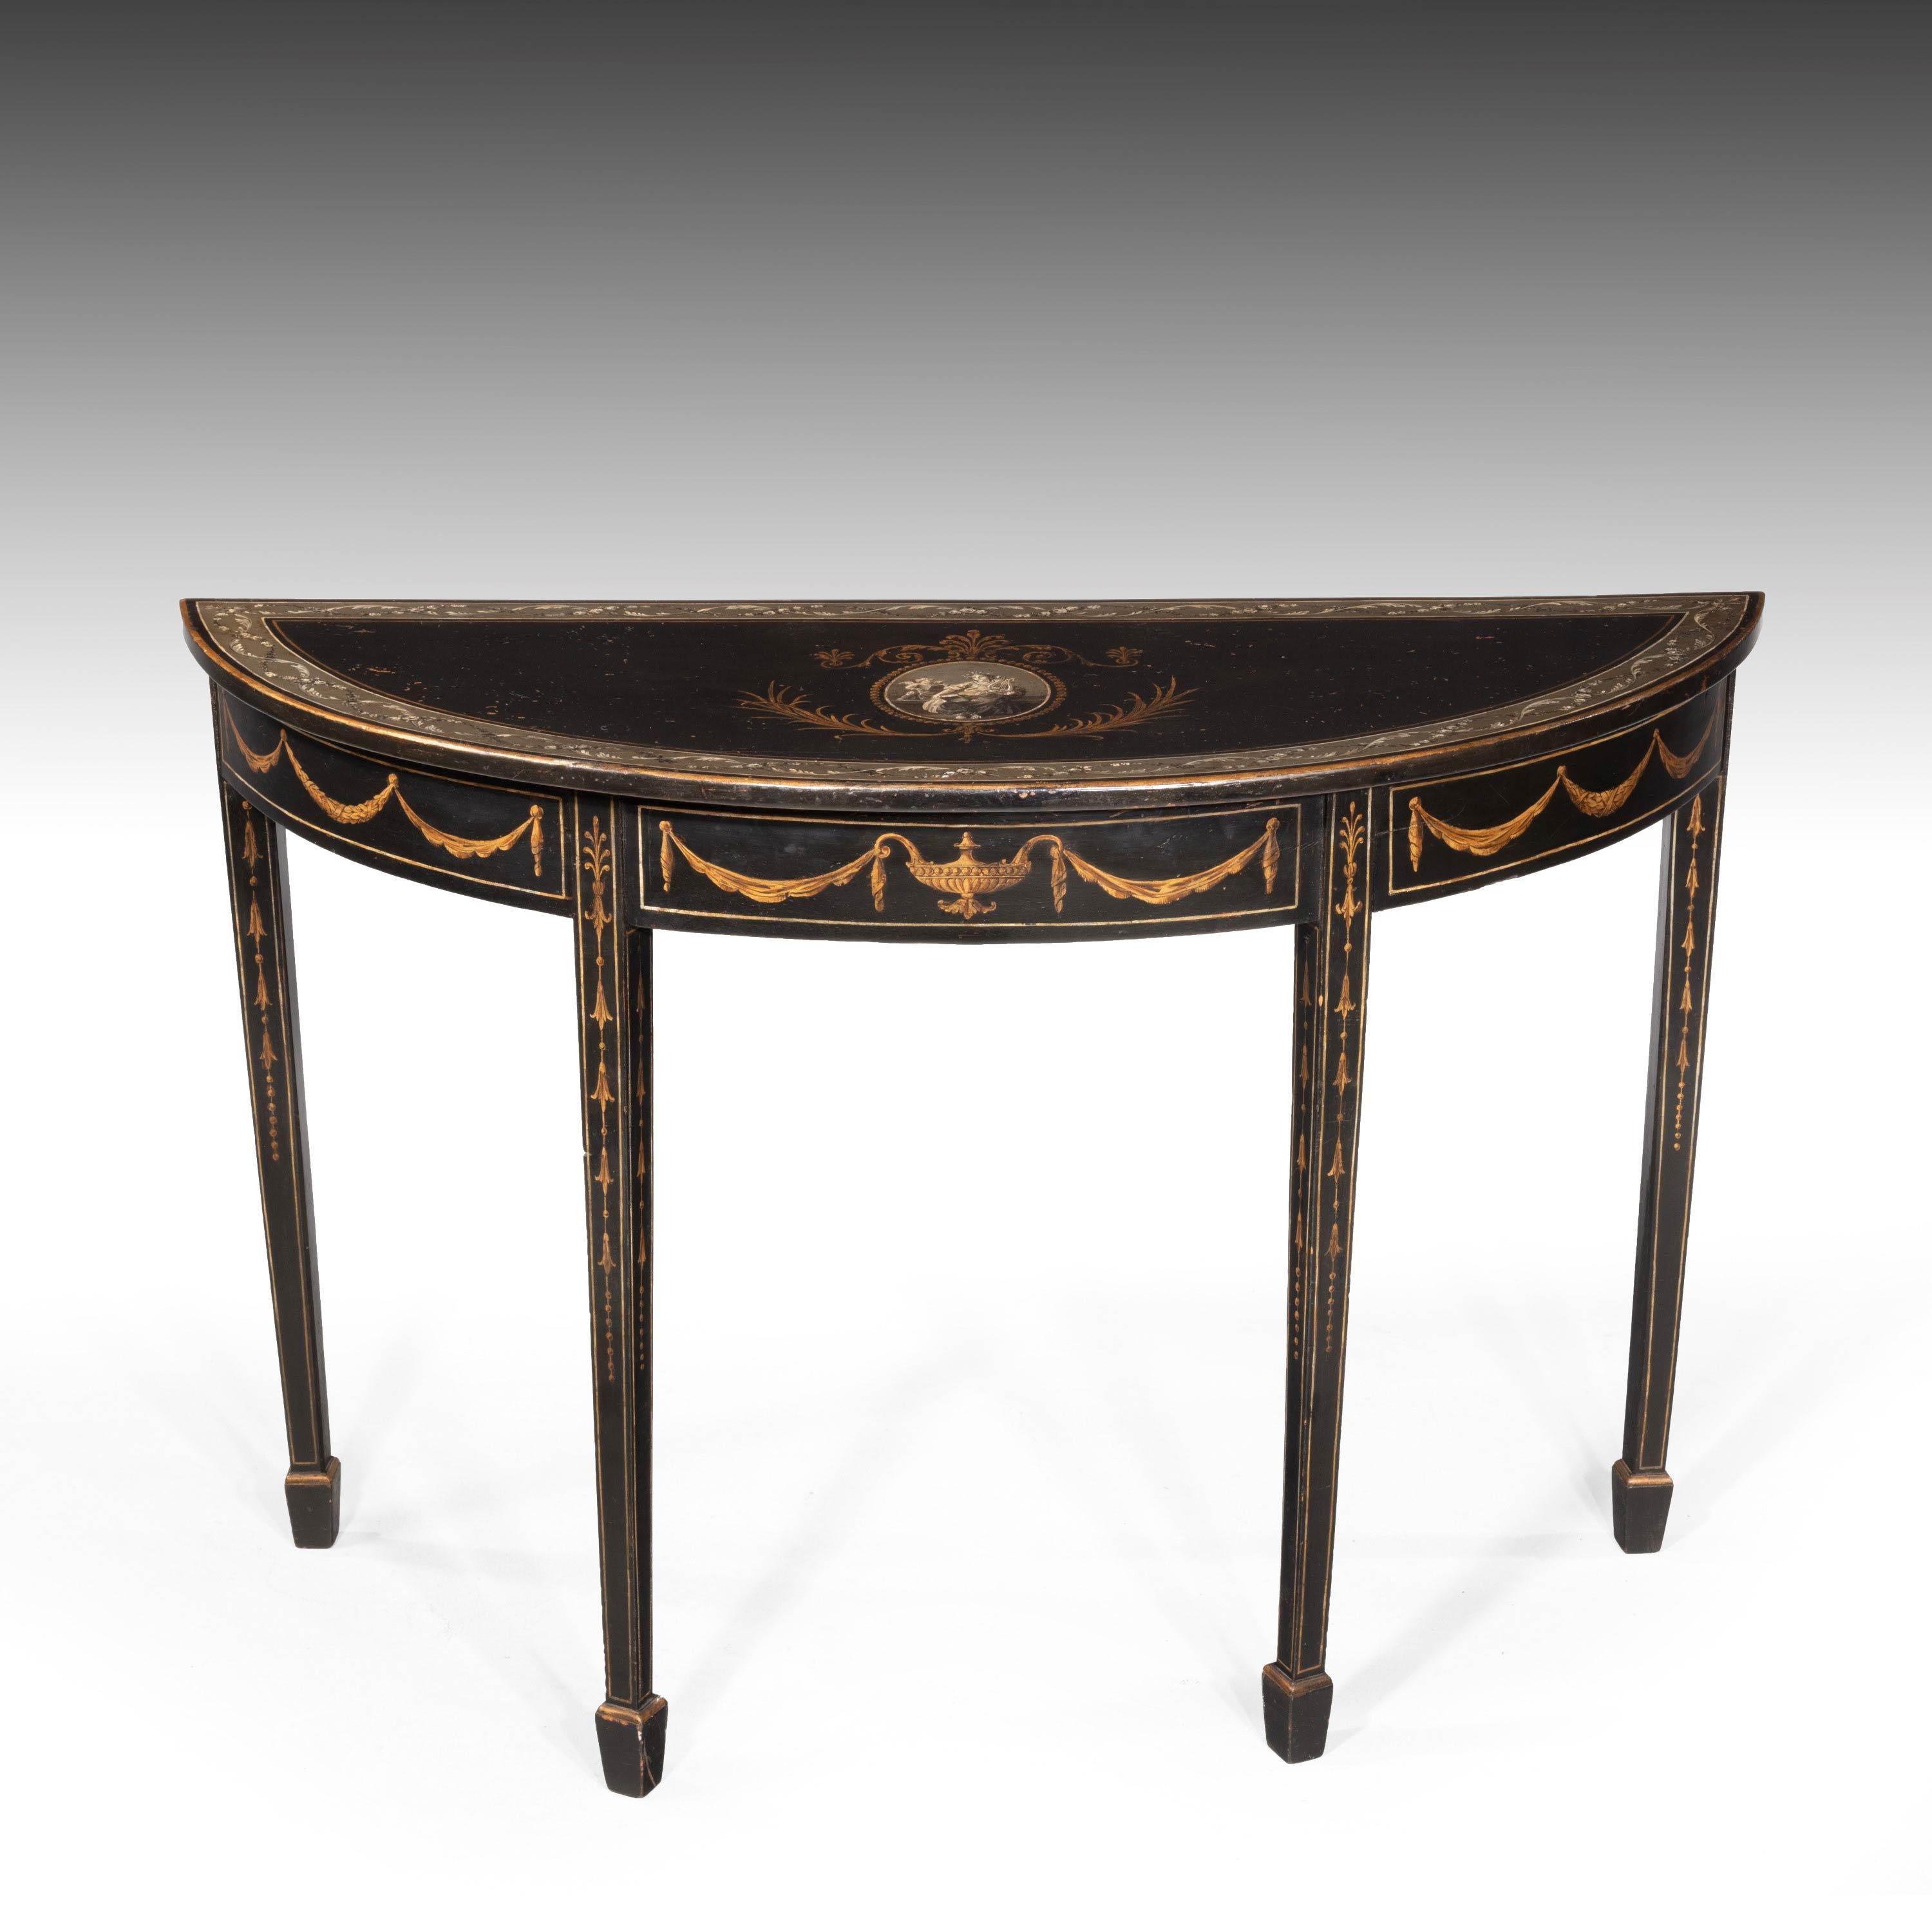 English Good Pair of Late George III Period Demilune Tables